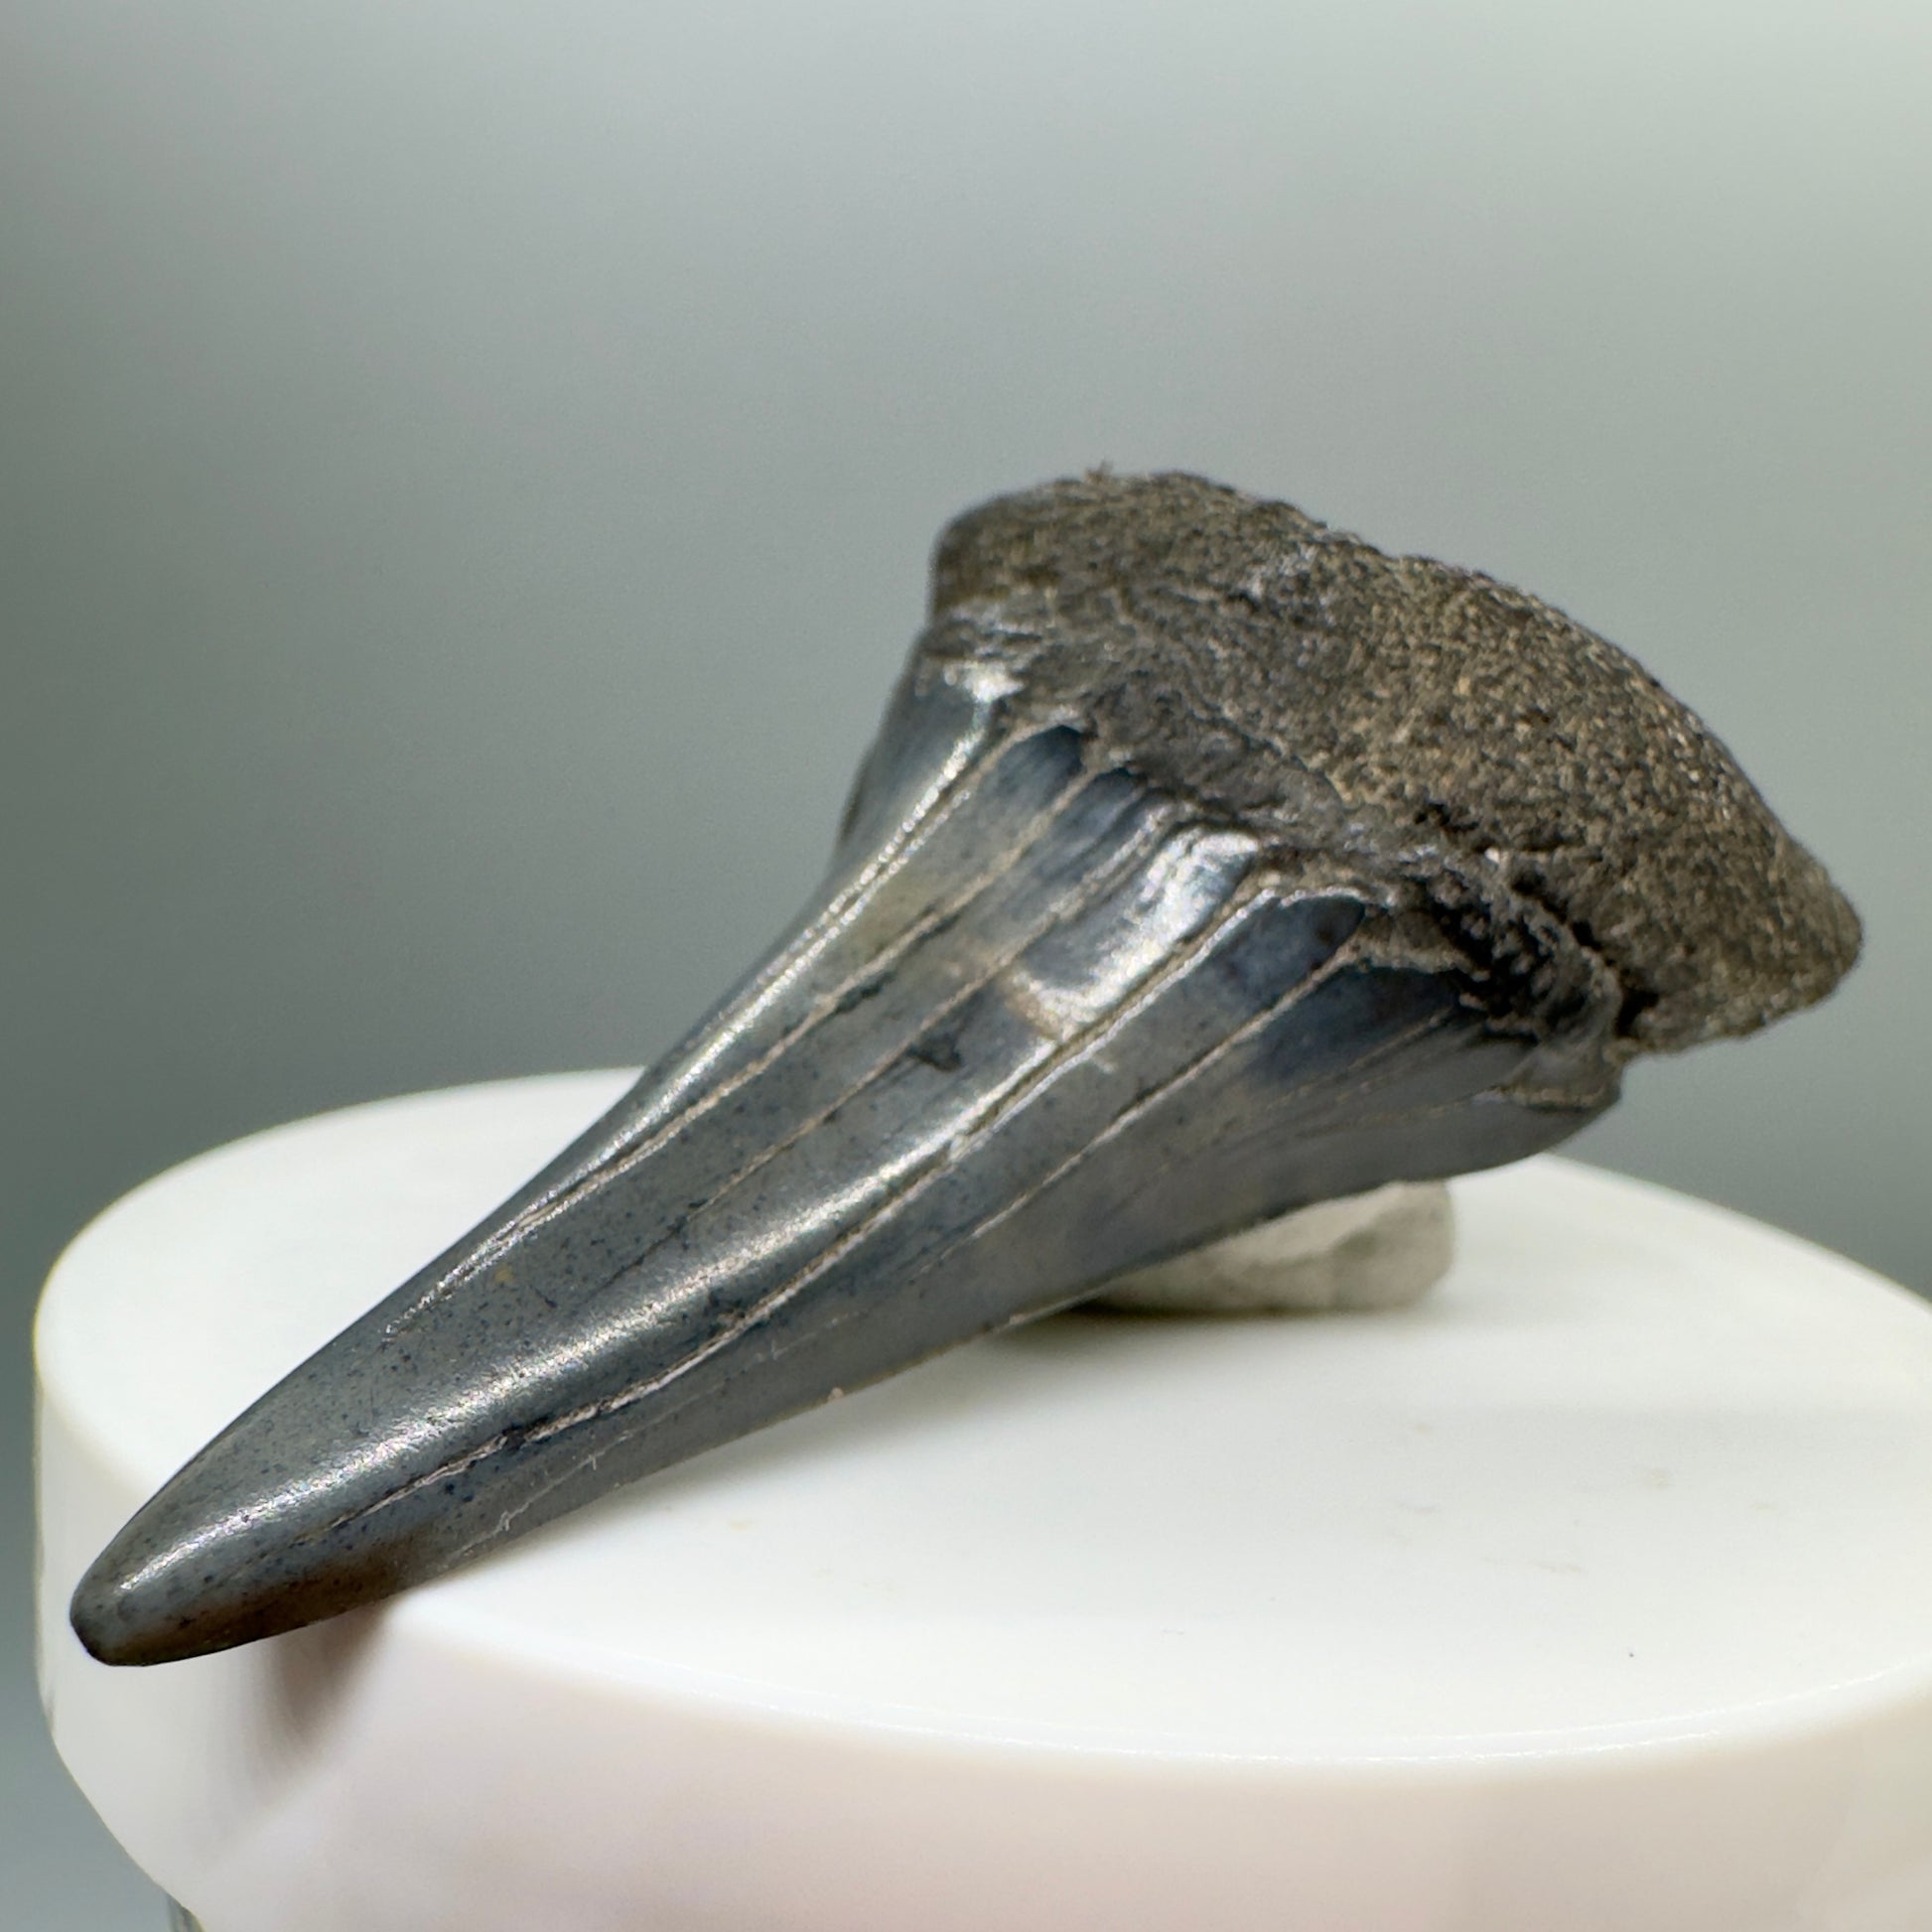 Large lower 2.61" Fossil Extinct Mako - Isurus hastalis Shark Tooth from Southeast USA M533 - Front right